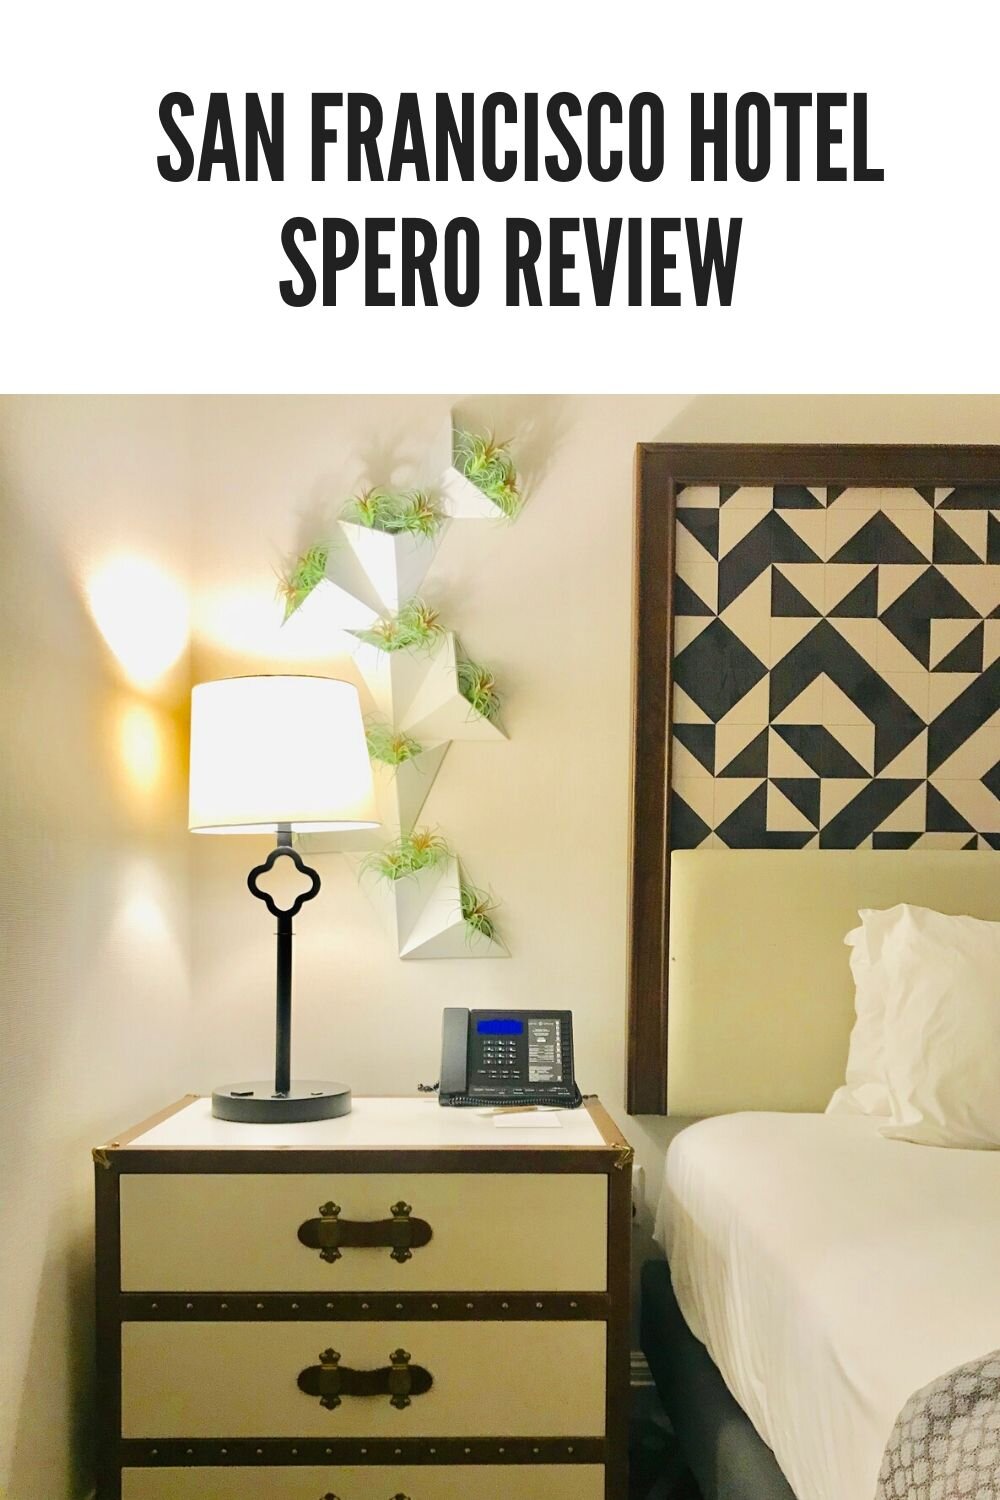 The Hotel Spero has a unique San Francisco style with a historical Spanish Colonial design that's perfectly situated near Union Square in San Francisco. An honest review recapping on my experience staying at Hotel Spero in Downtown San Francisco #sa…